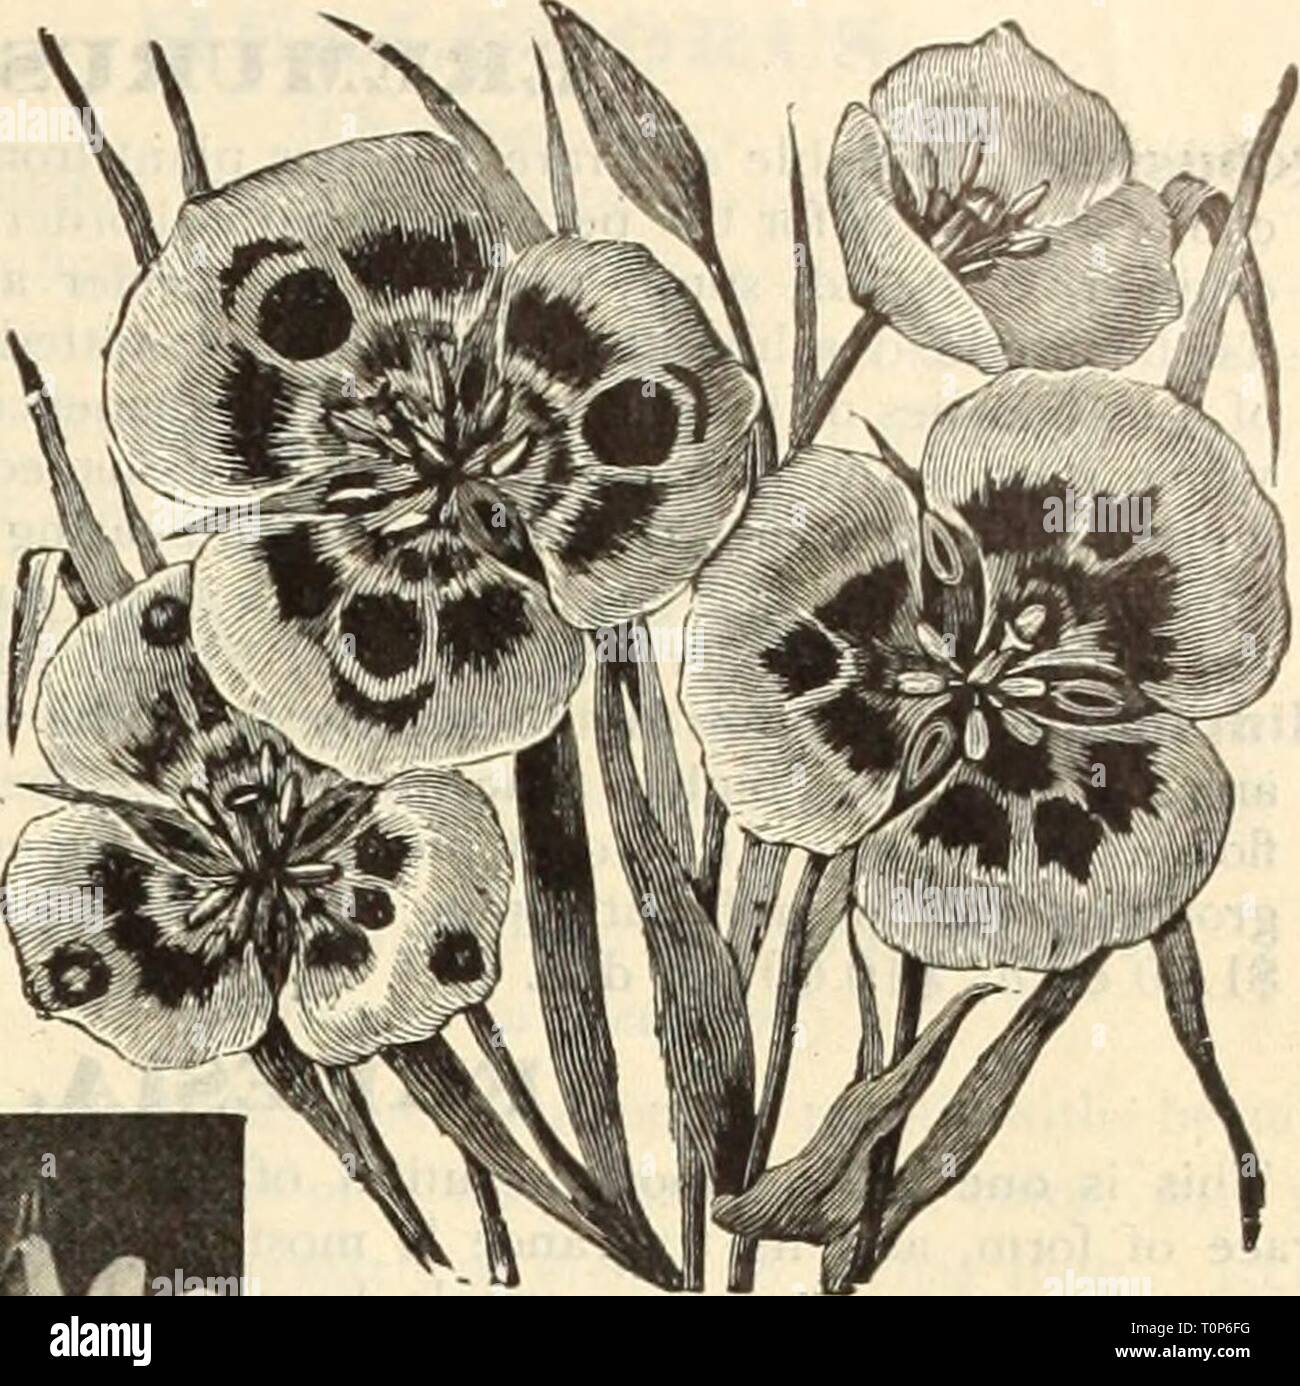 Dreer's autumn catalogue, 1913 (1913) Dreer's autumn catalogue, 1913  dreersautumncata1913henr Year: 1913  Chionodoxa. yellow and shades of orange, per 100. Calochortus. Crown Imperials. (Frit ilia ria Imperial is. Very showy and stately early spring- blooming plants. The flowers are bell-shaped, and are borne in a whorl at the top of the plant, which grows from 3 to 4 feet high; will grow well in any good garden soil. At the time of planting the soil should be deeply dug and well manured. They should be planted two or three in a clump, 6 inches deep, and then left alone for years. When establ Stock Photo